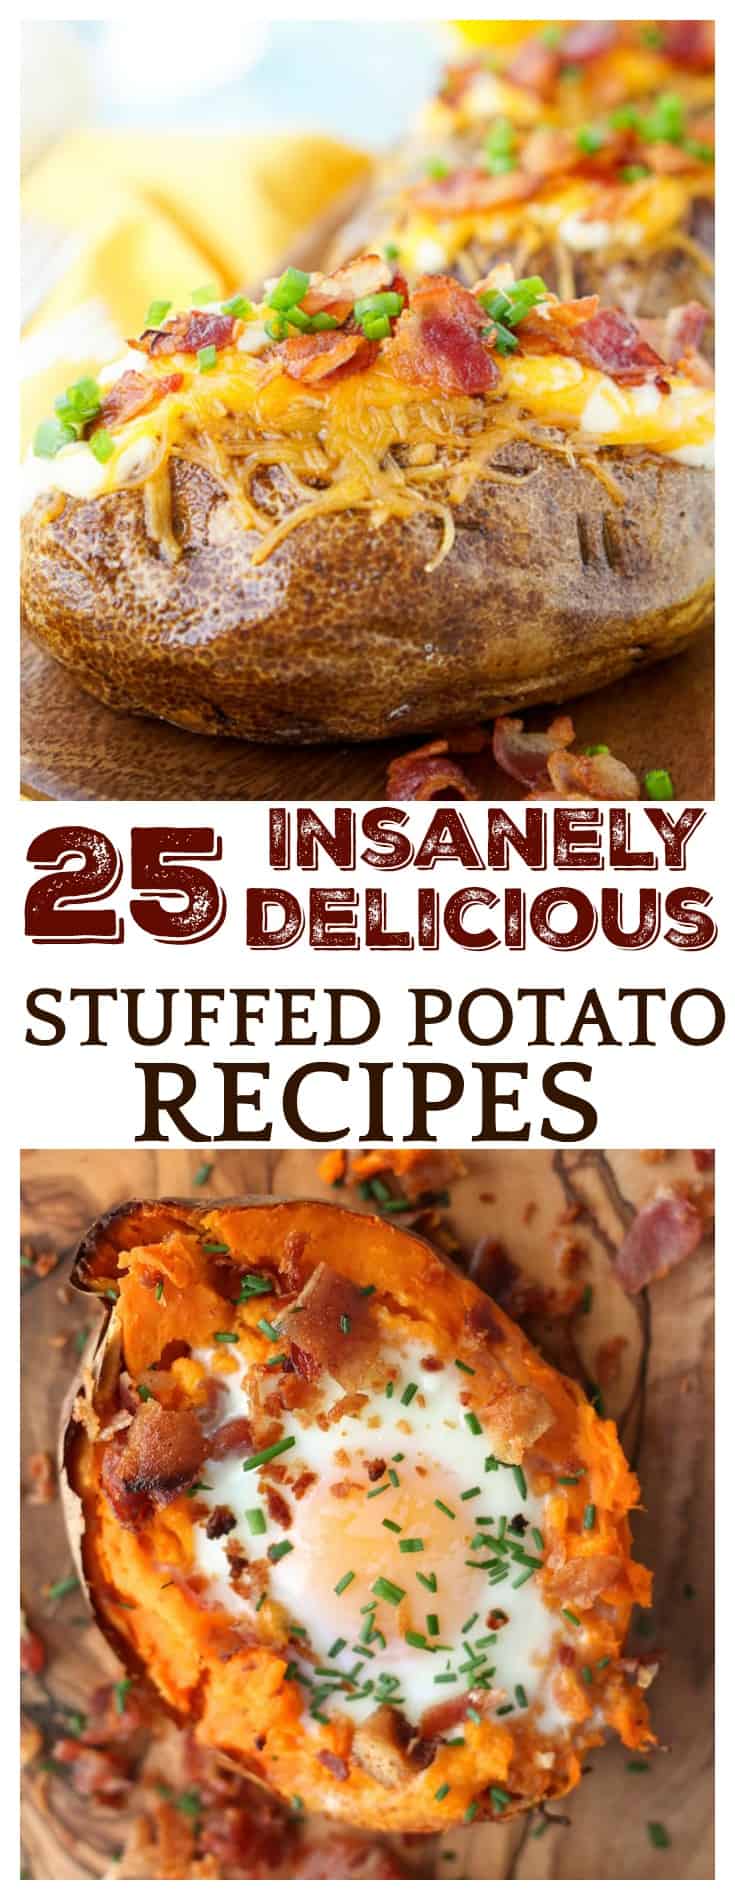 These 25 Insanely Delicious Stuffed Potato Recipes are all so amaing, it will be hard to decide which to try first! From loaded white potatoes to stuffed sweet potatoes, this list has it all! There are even recipes for potato skins and loaded smashed potatoes as well! 